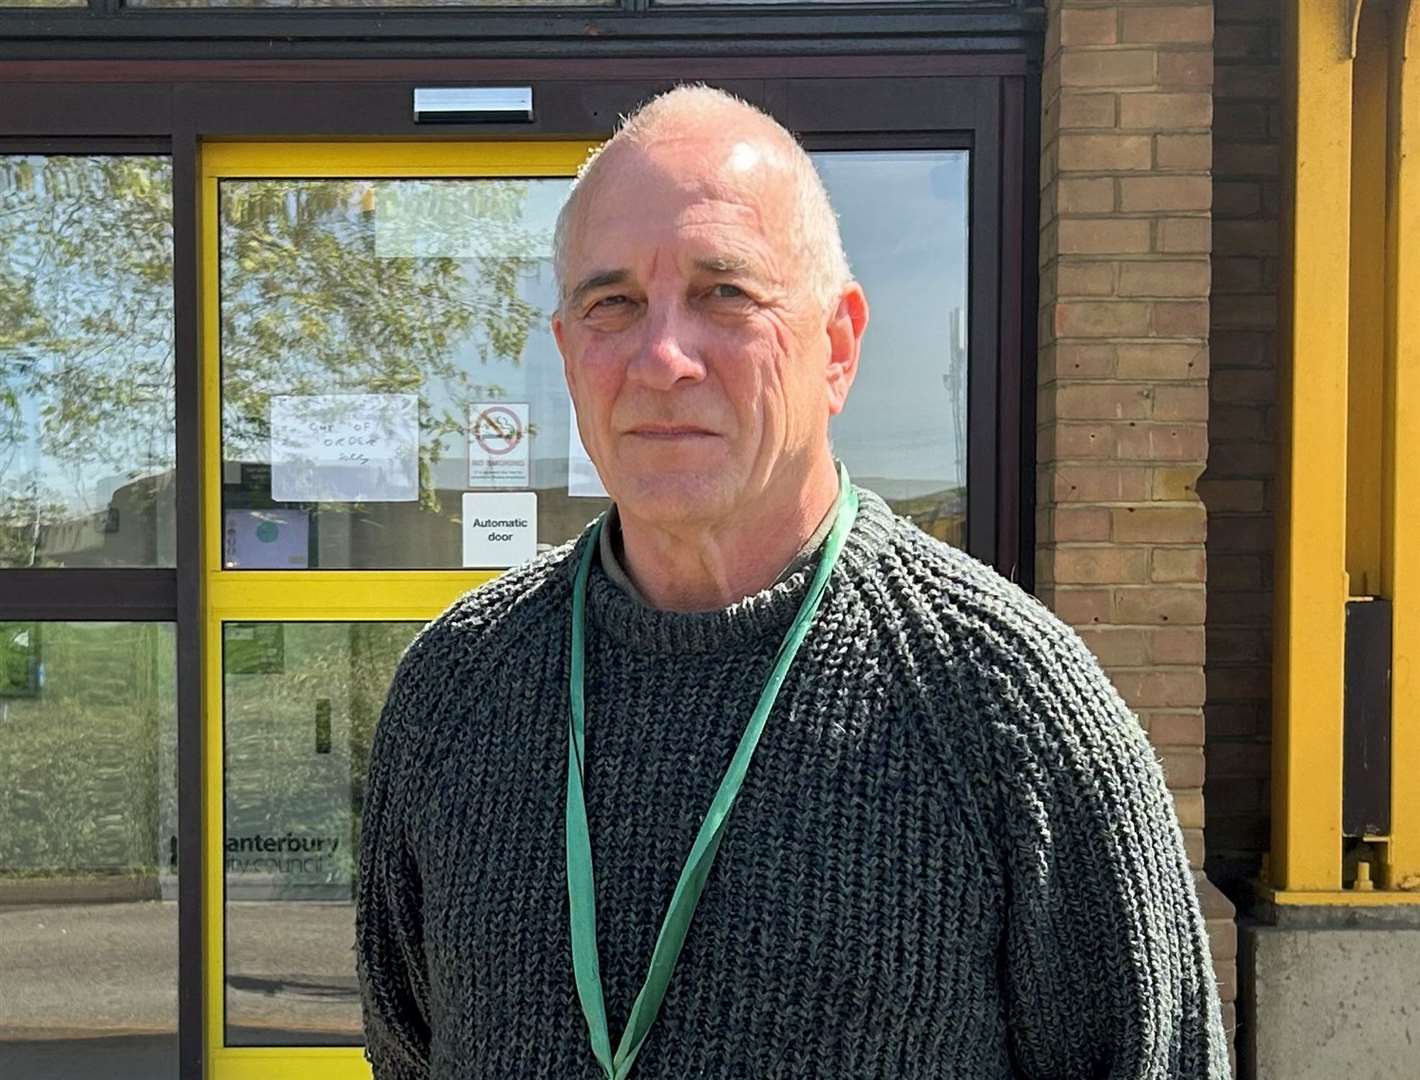 Green Party councillor Andrew Harvey has called for Sturry Park and Ride to be closed again just weeks after it reopened